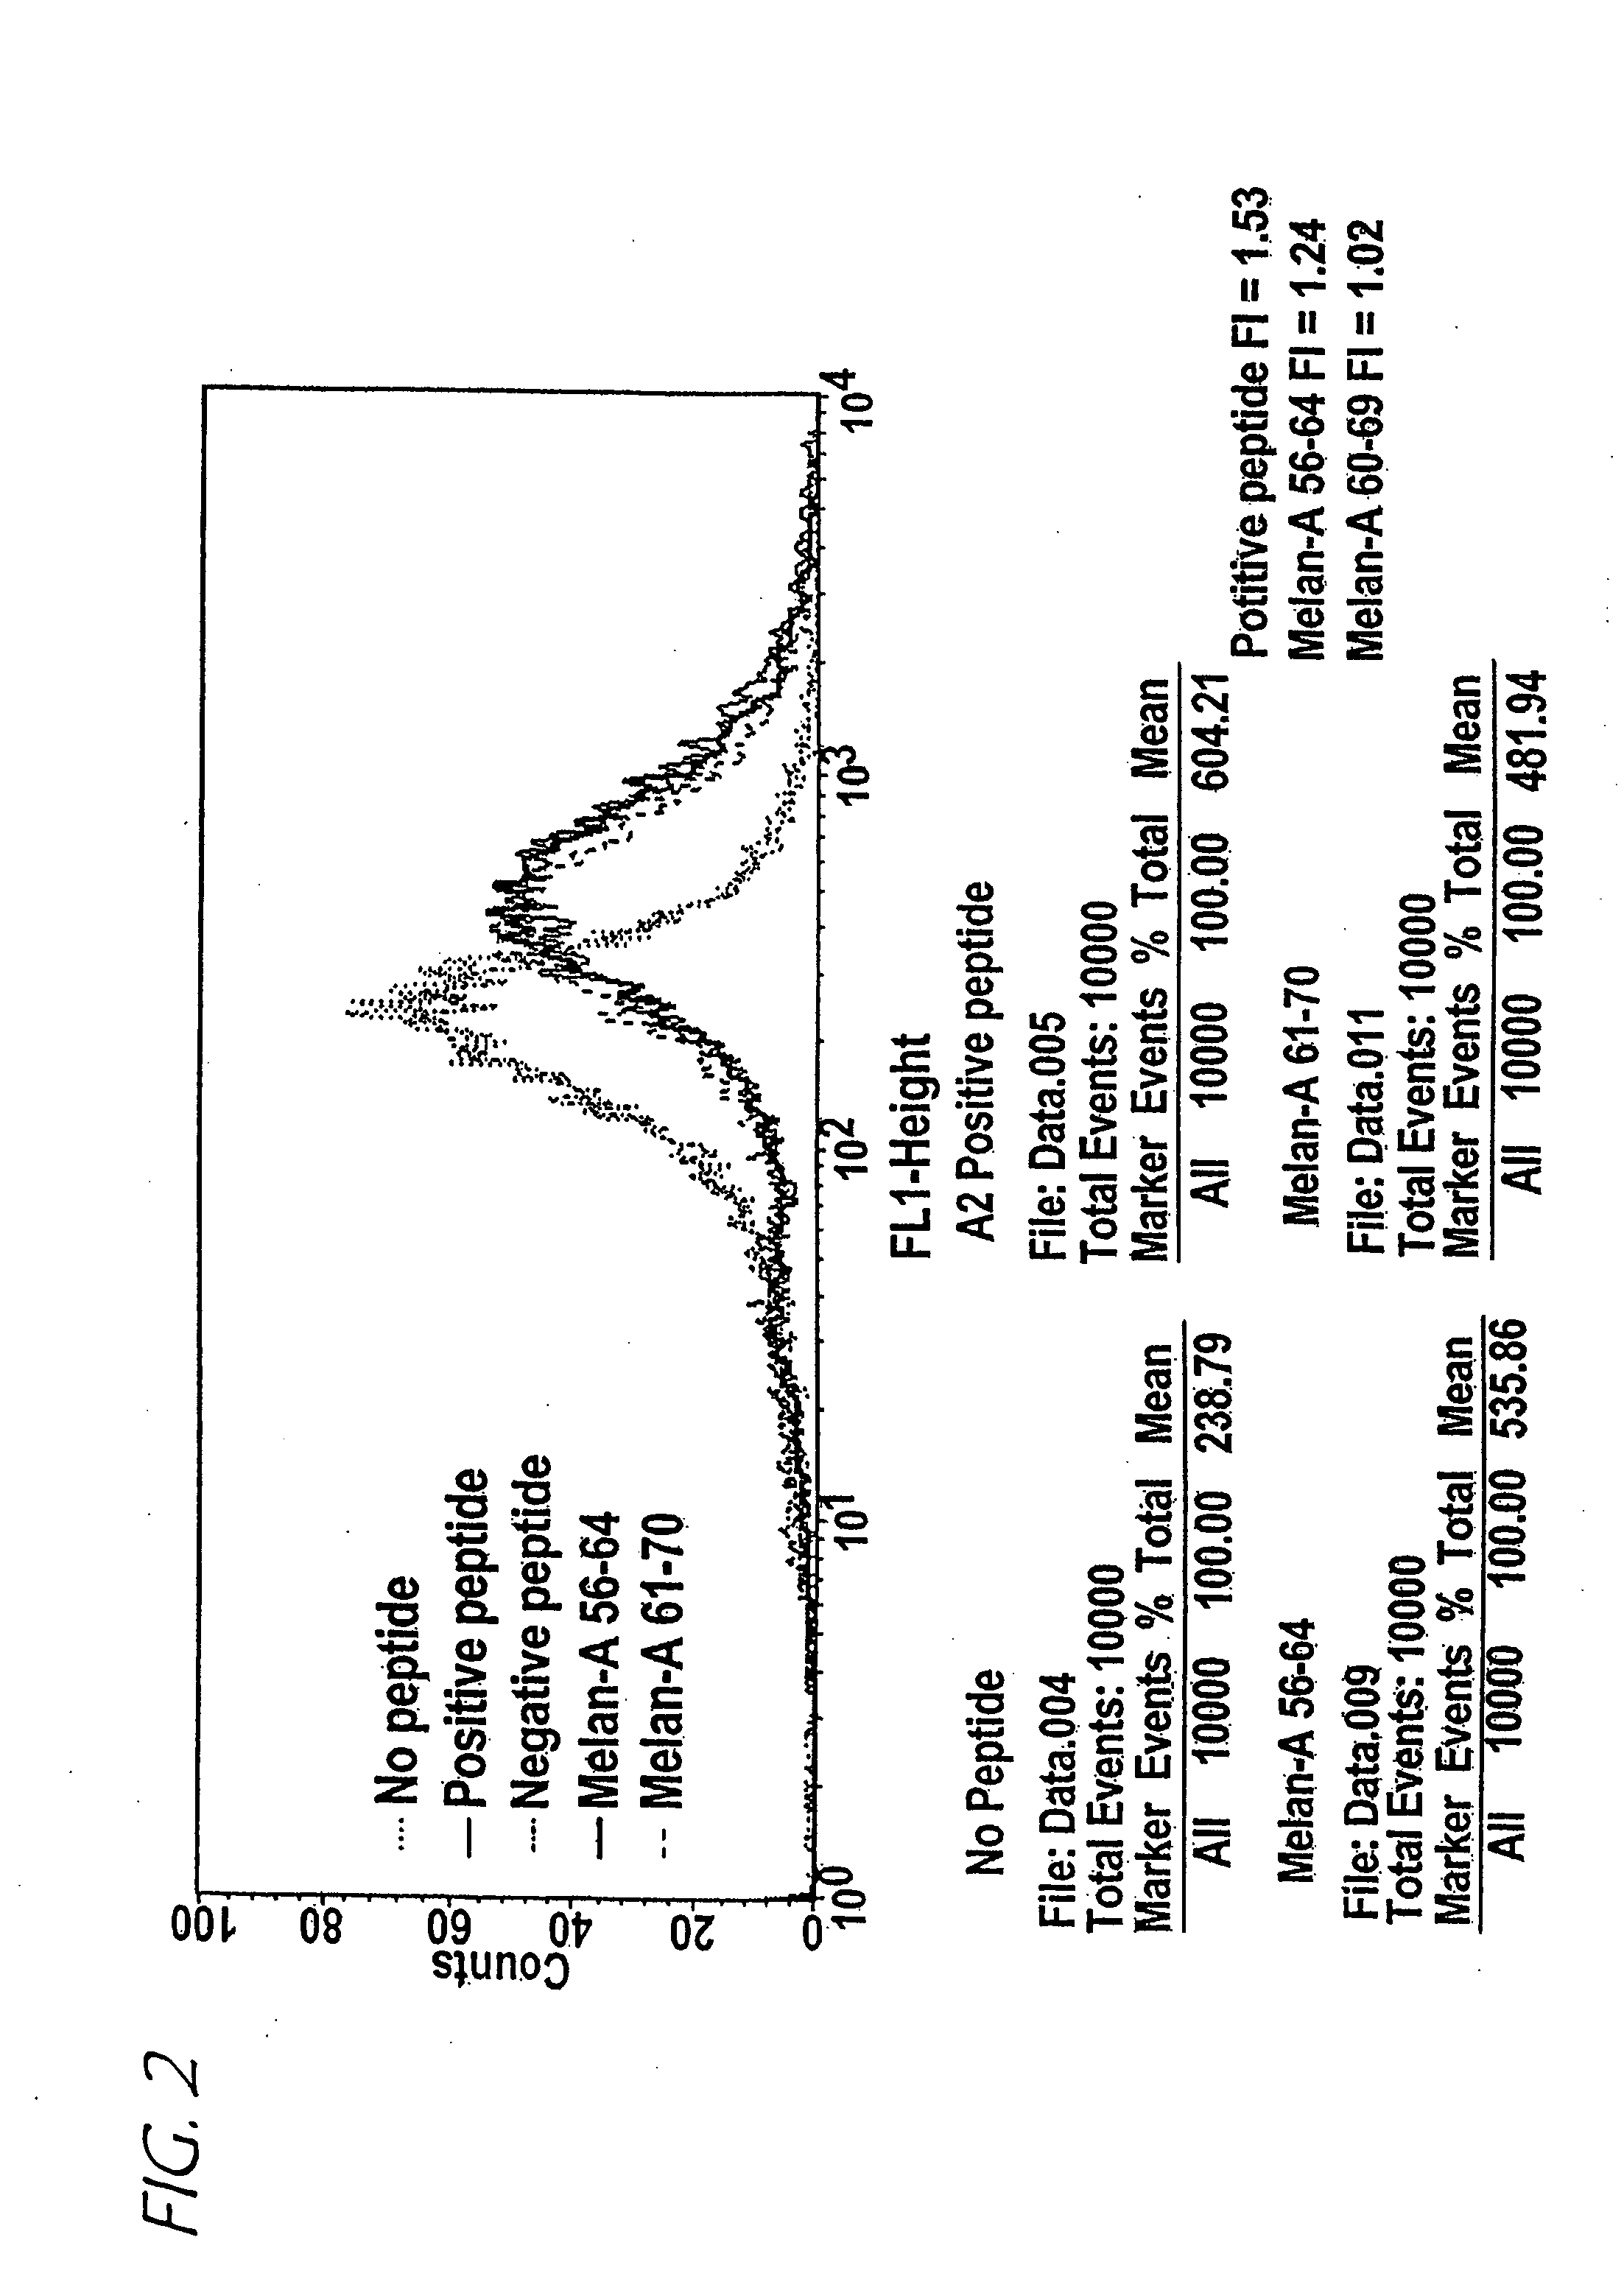 Method of epitope discovery